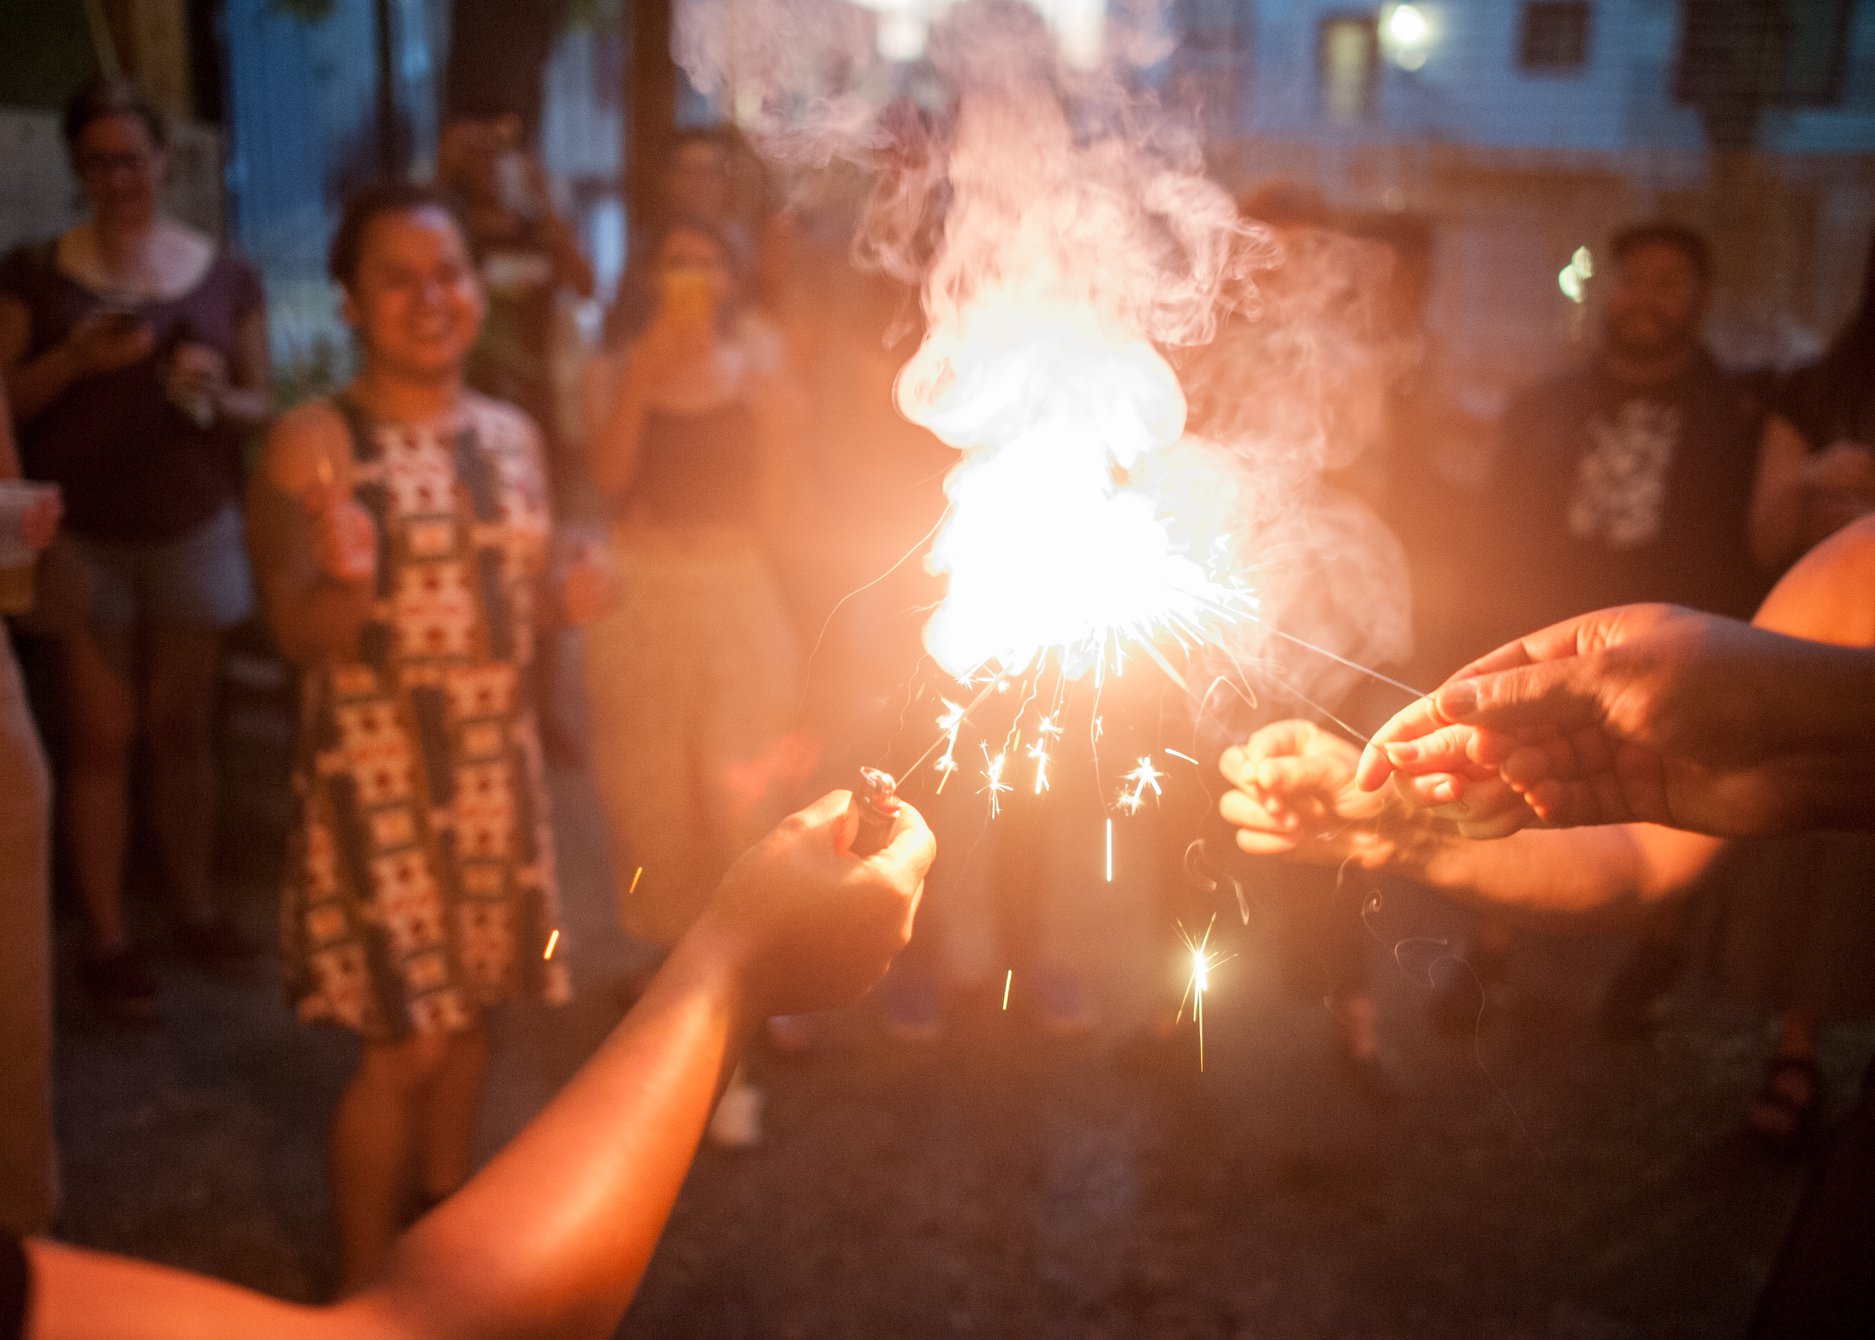 Image: A bright spark can be seen at the center of the image with hands reaching in to light individual sparklers from the flame. In the background different people can be seen smiling.